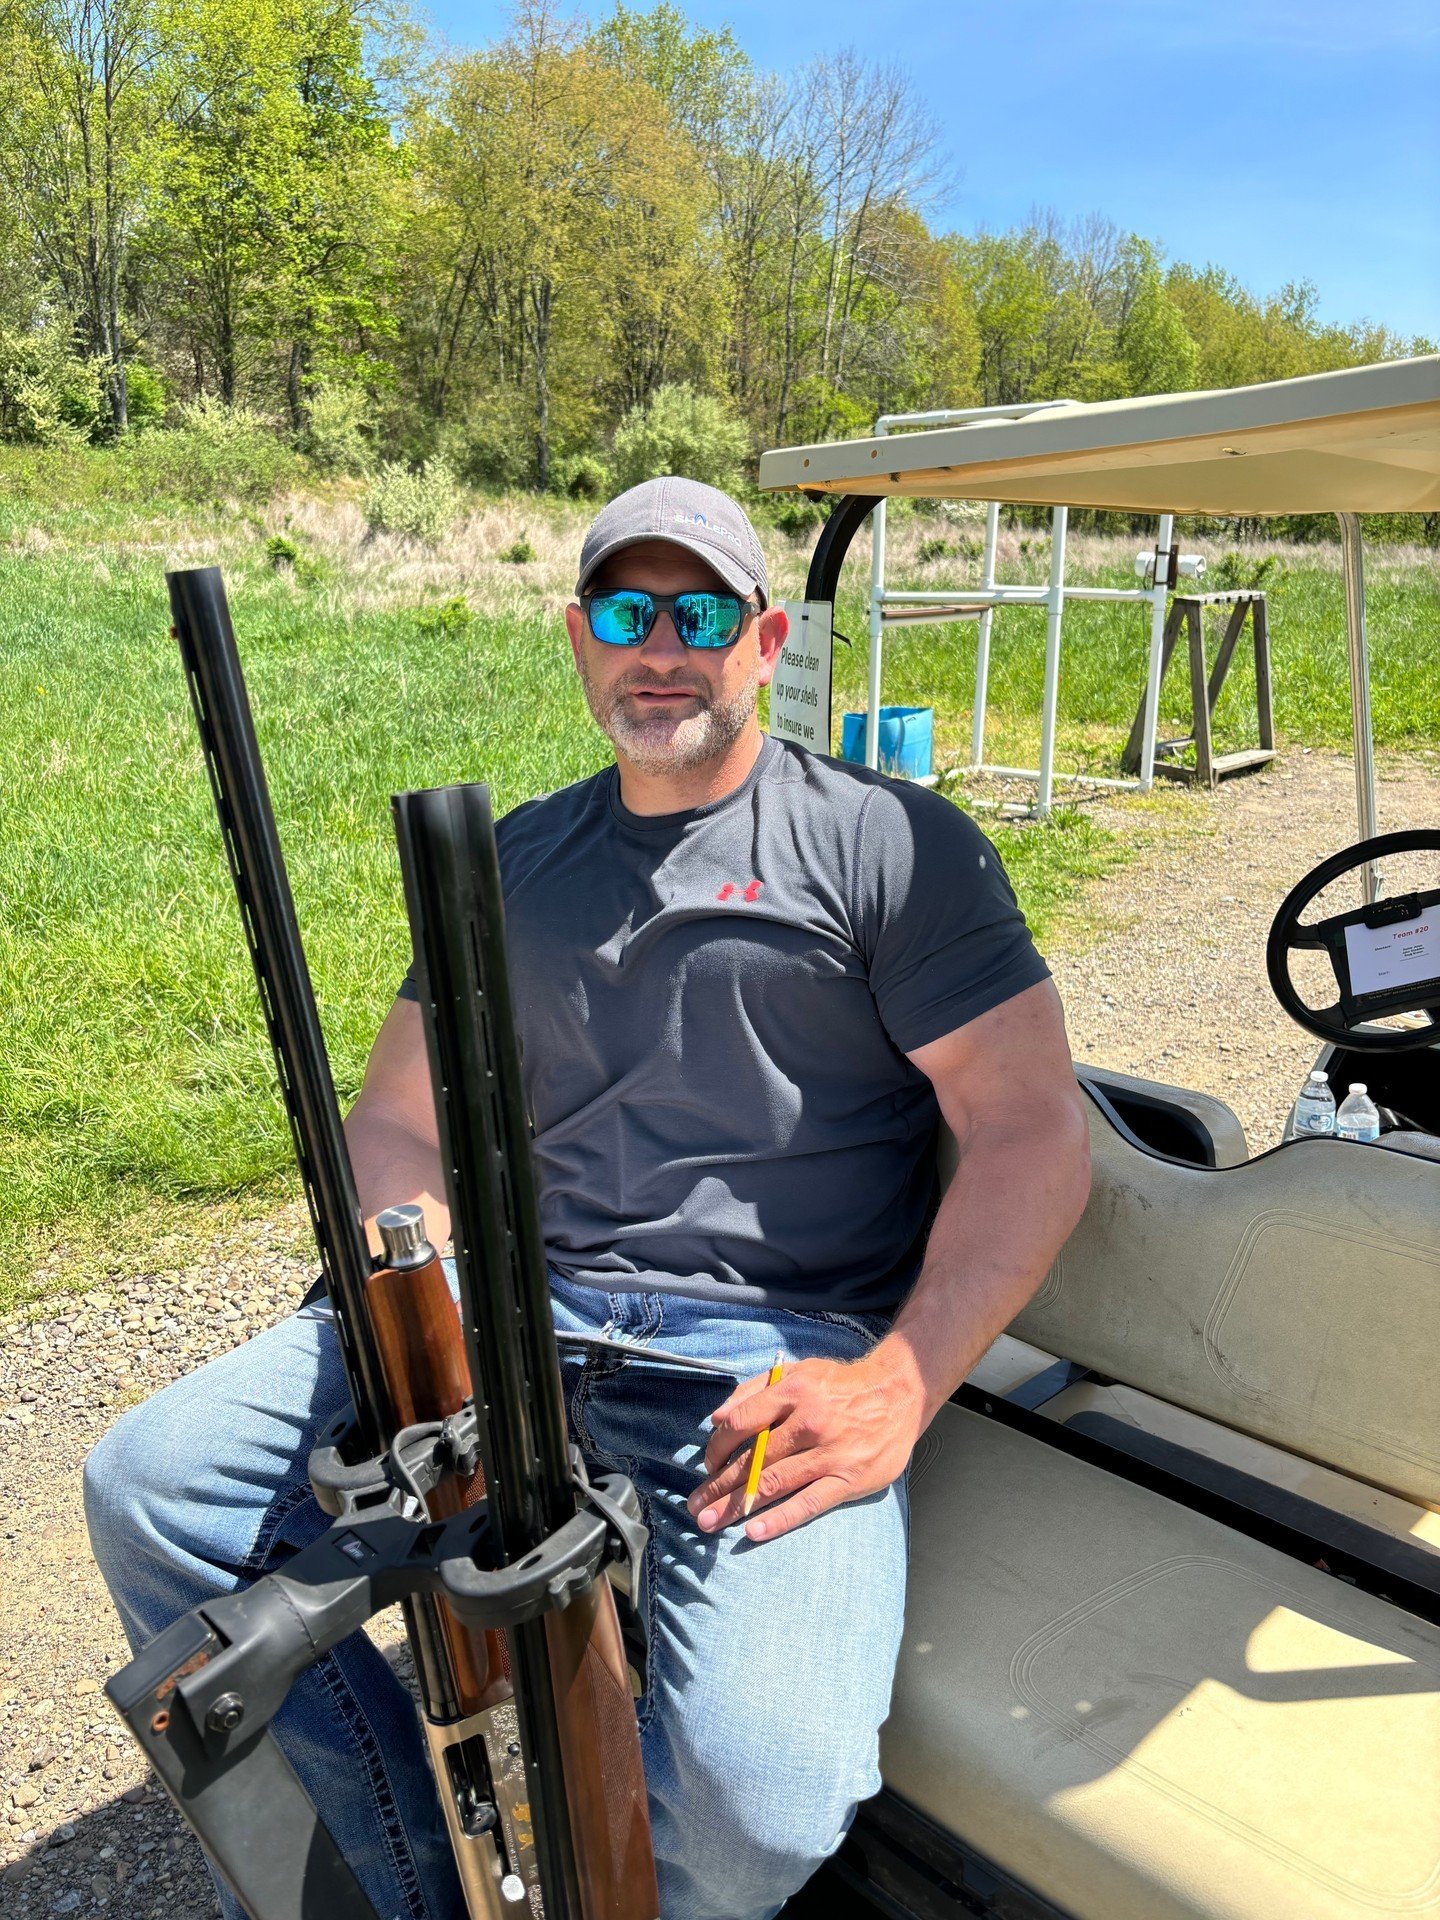 Thank to PIOGA for another great clay shoot today! The weather was beautiful and our teams had a great time!